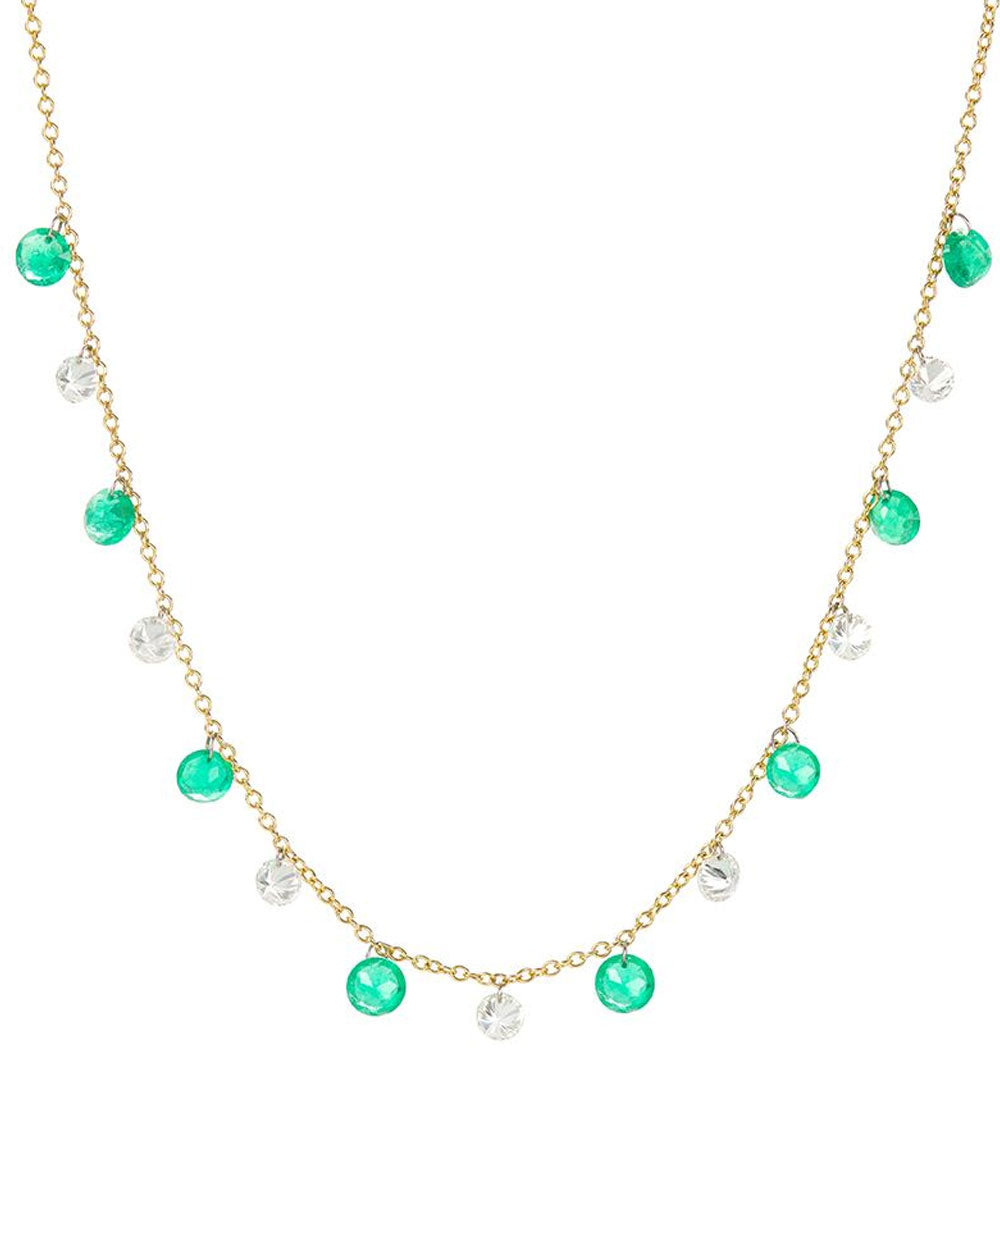 Floating Emerald and Diamond Necklace